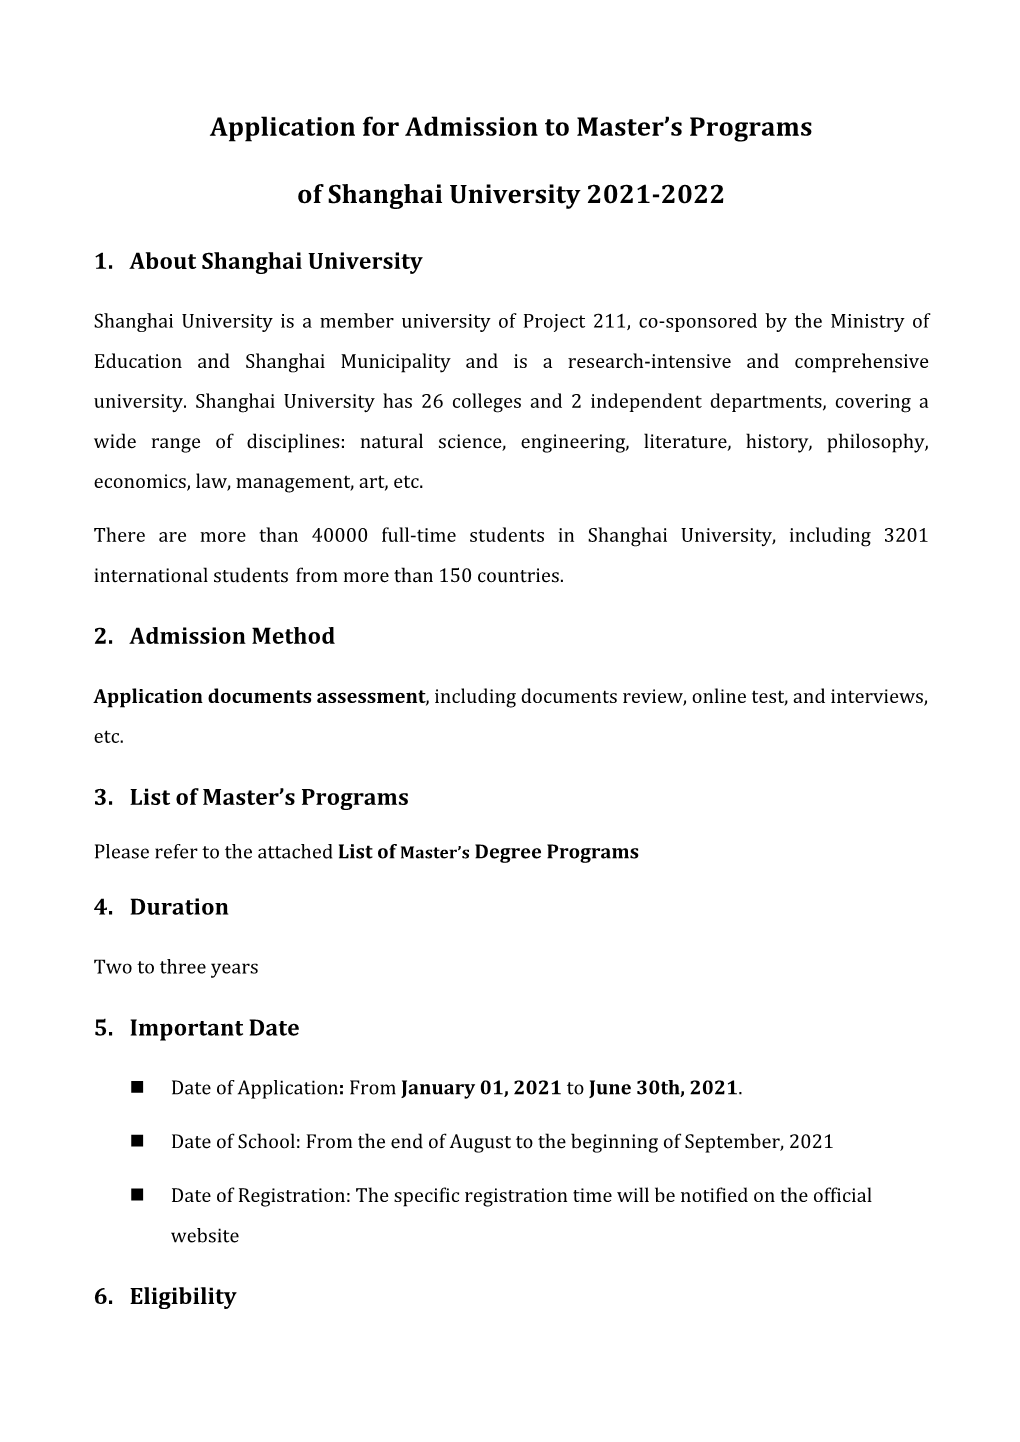 Application for Admission to Master's Programs of Shanghai University 2021-2022